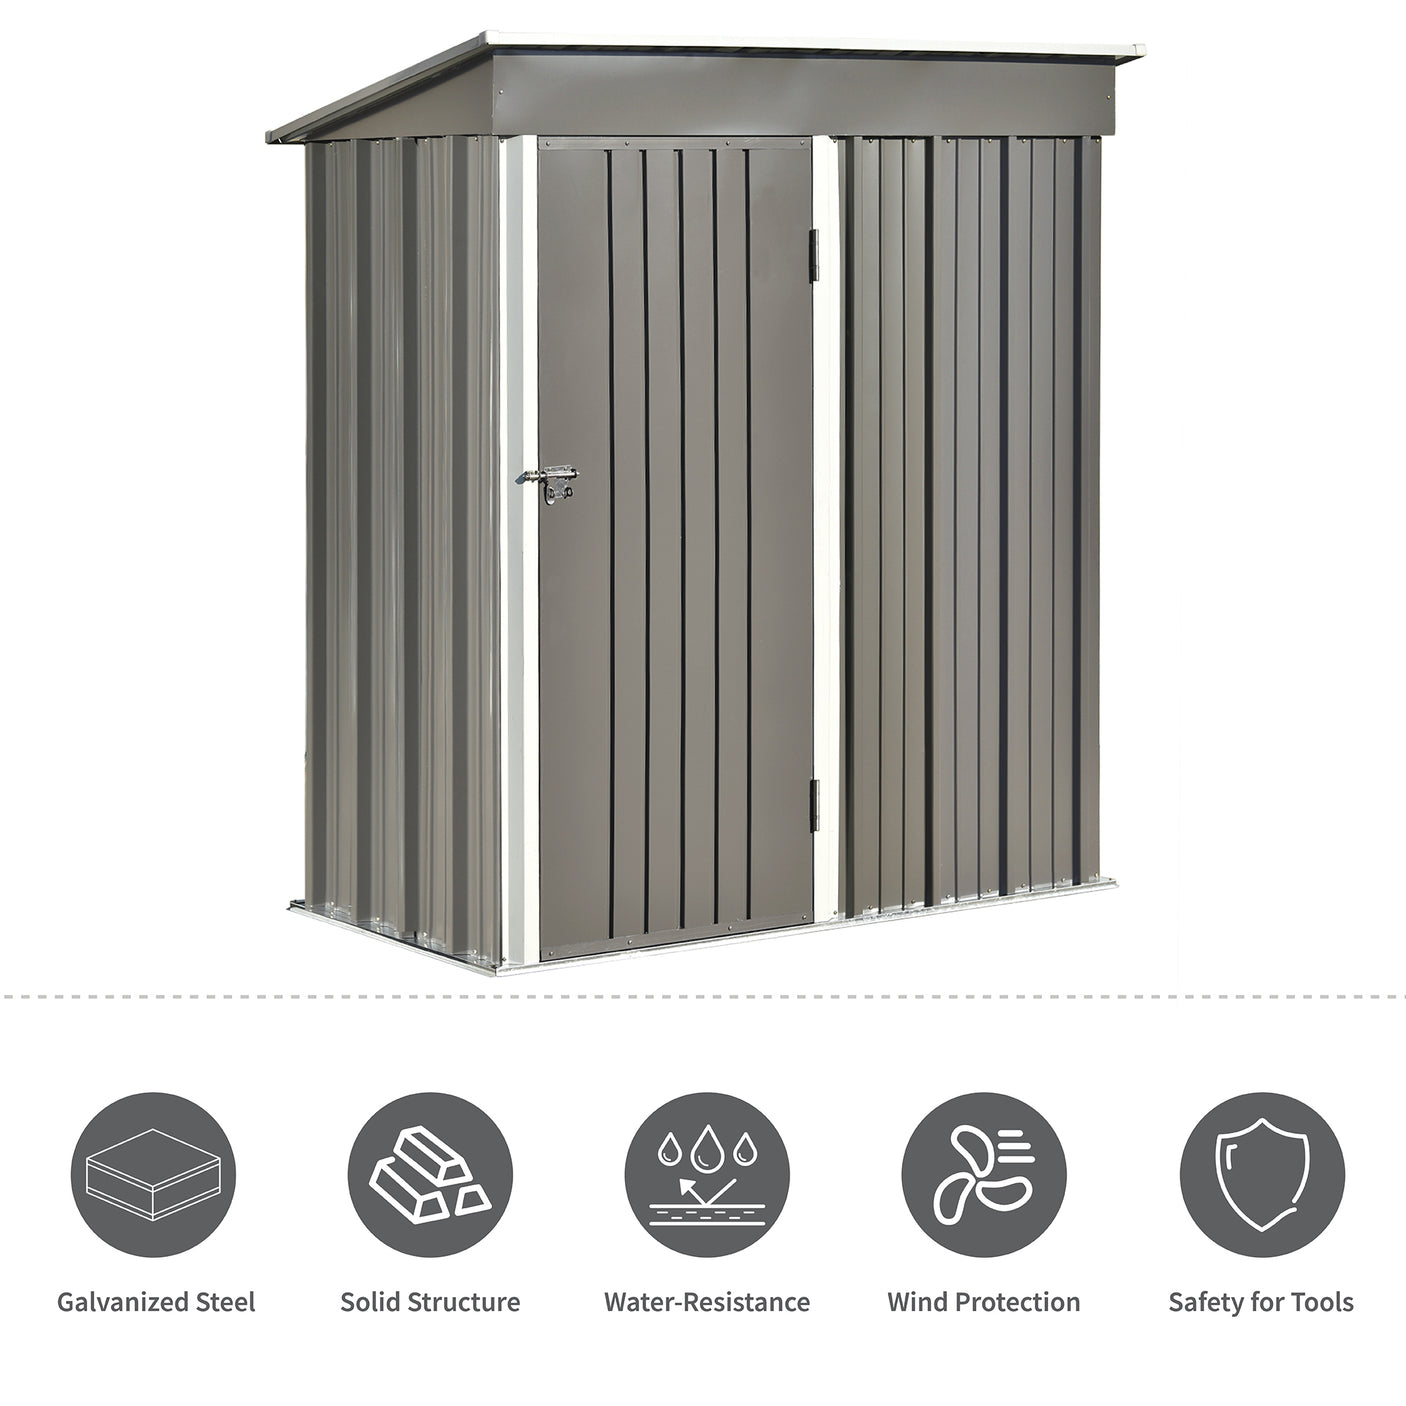 TOPMAX Patio 5ft Wx3ft. L Garden Shed, Metal Lean-to Storage Shed with Adjustable Shelf and Lockable Door, Tool Cabinet for Backyard, Lawn, Garden, Gray